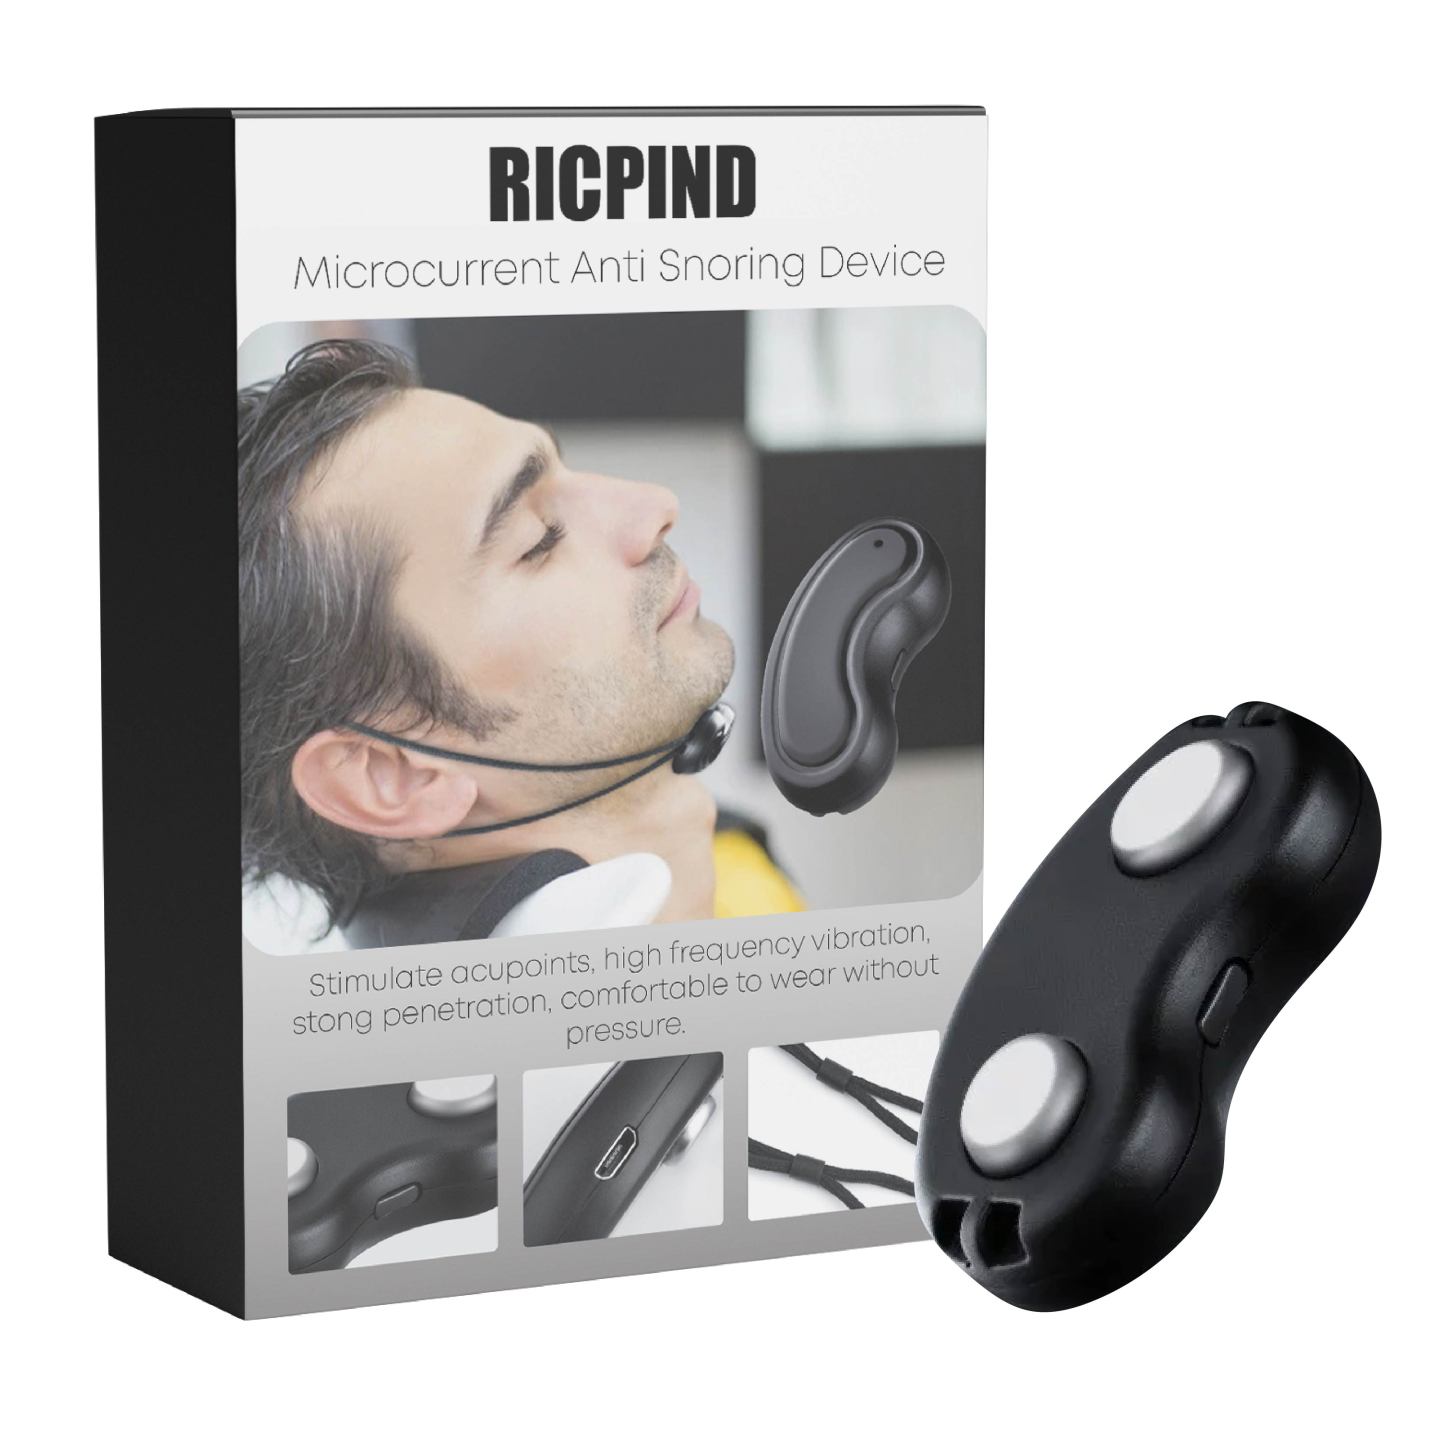 Ricpind Microcurrent AntiSnoring Device-Topselling